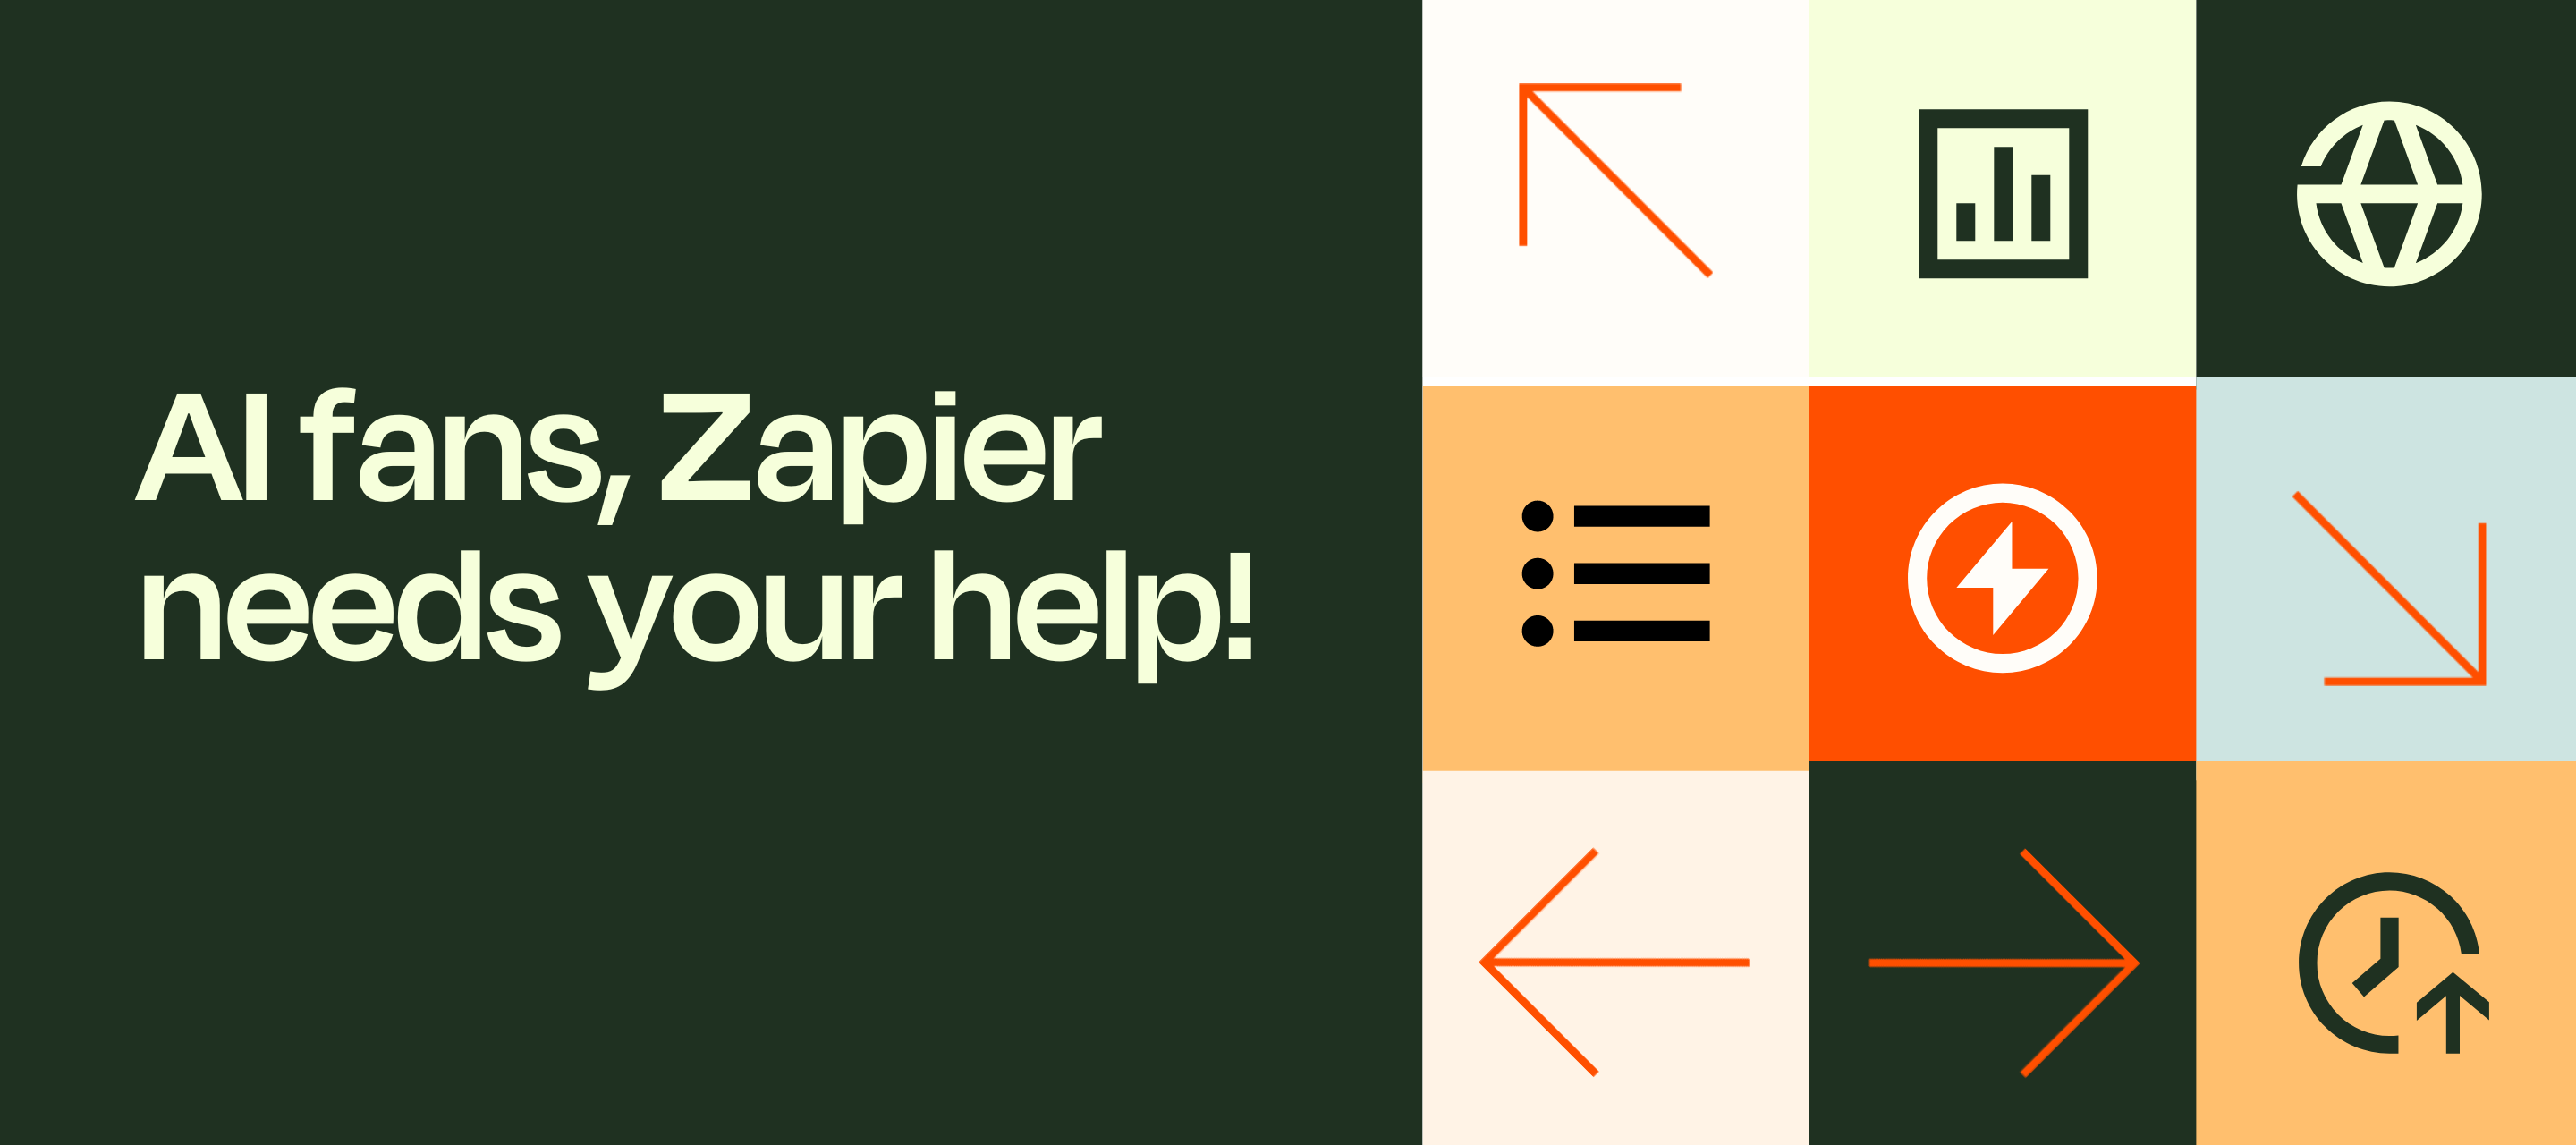 The Zapier team is up to something...juicy. And we need your help!